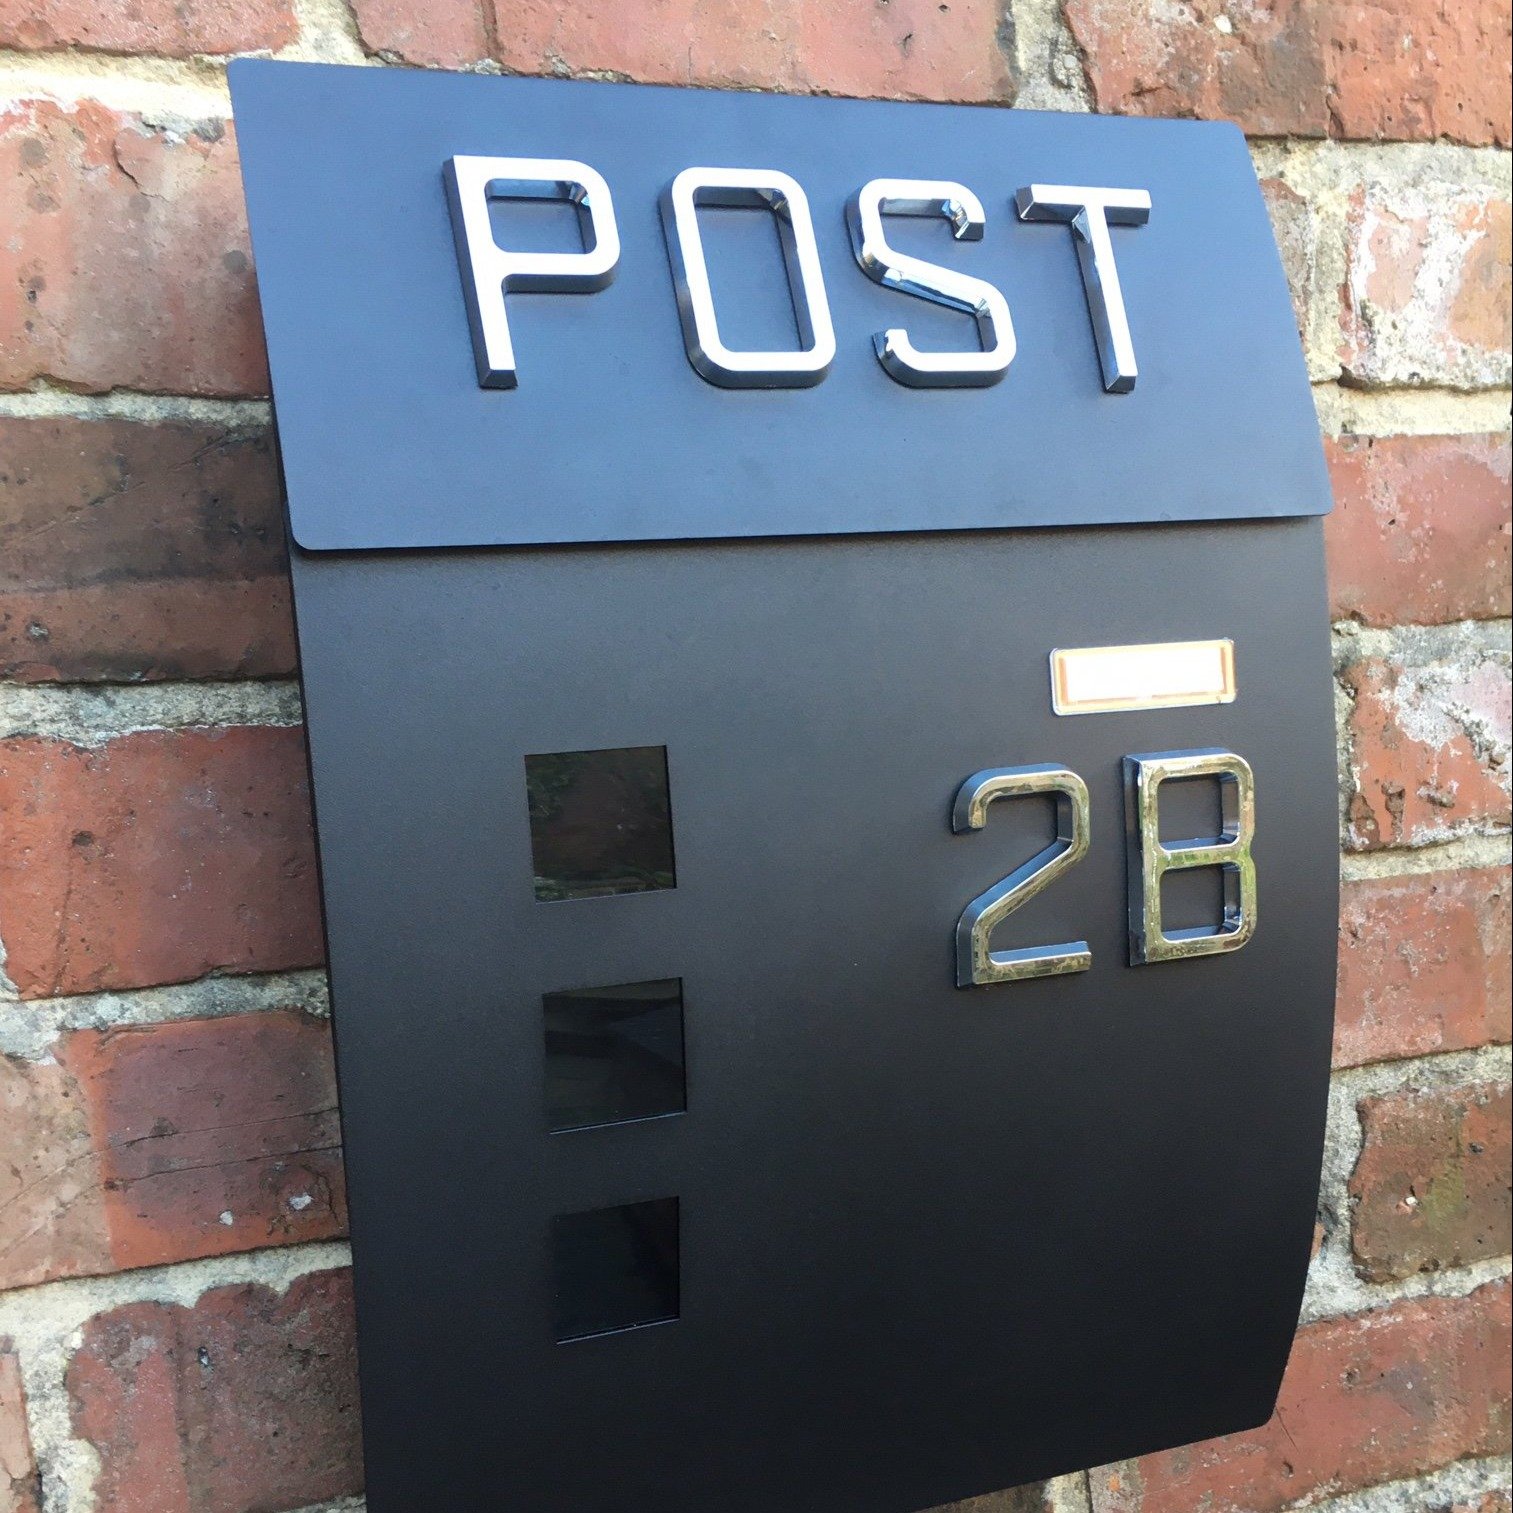 Post box numbers